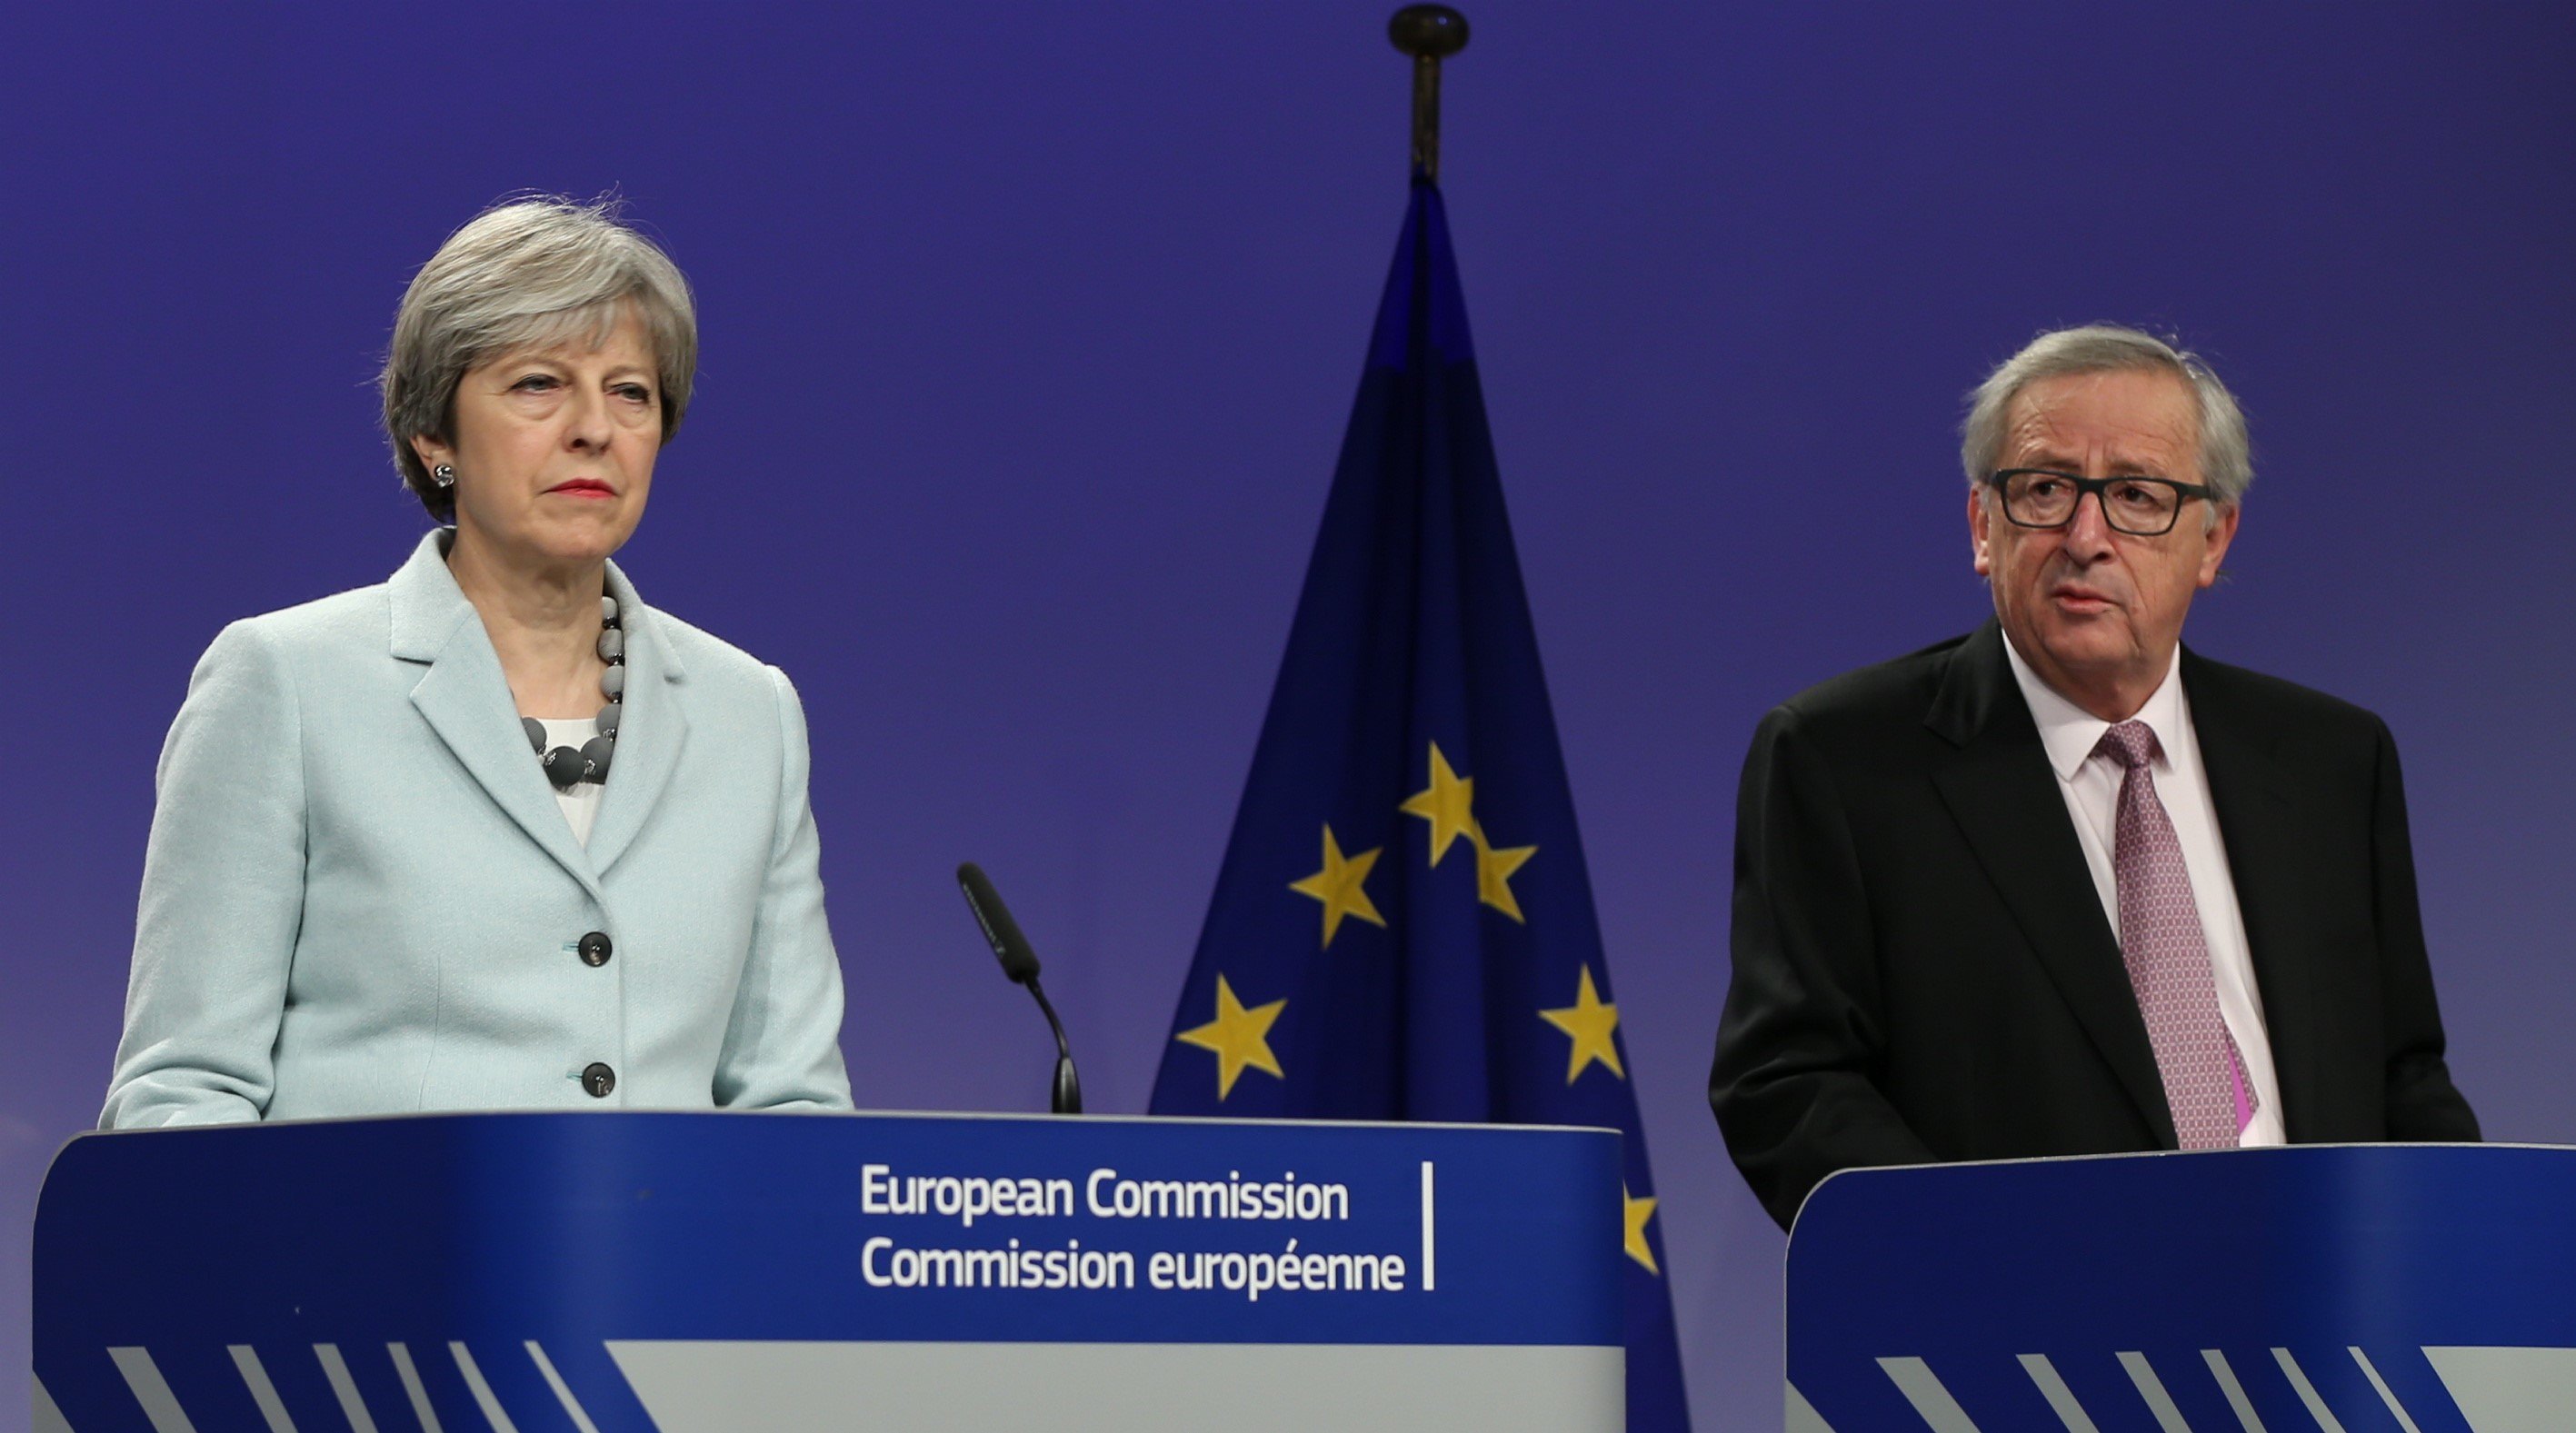 Theresa May and European Commission Chief Jean-Claude Juncker hold a joint press conference in Brussels this morning